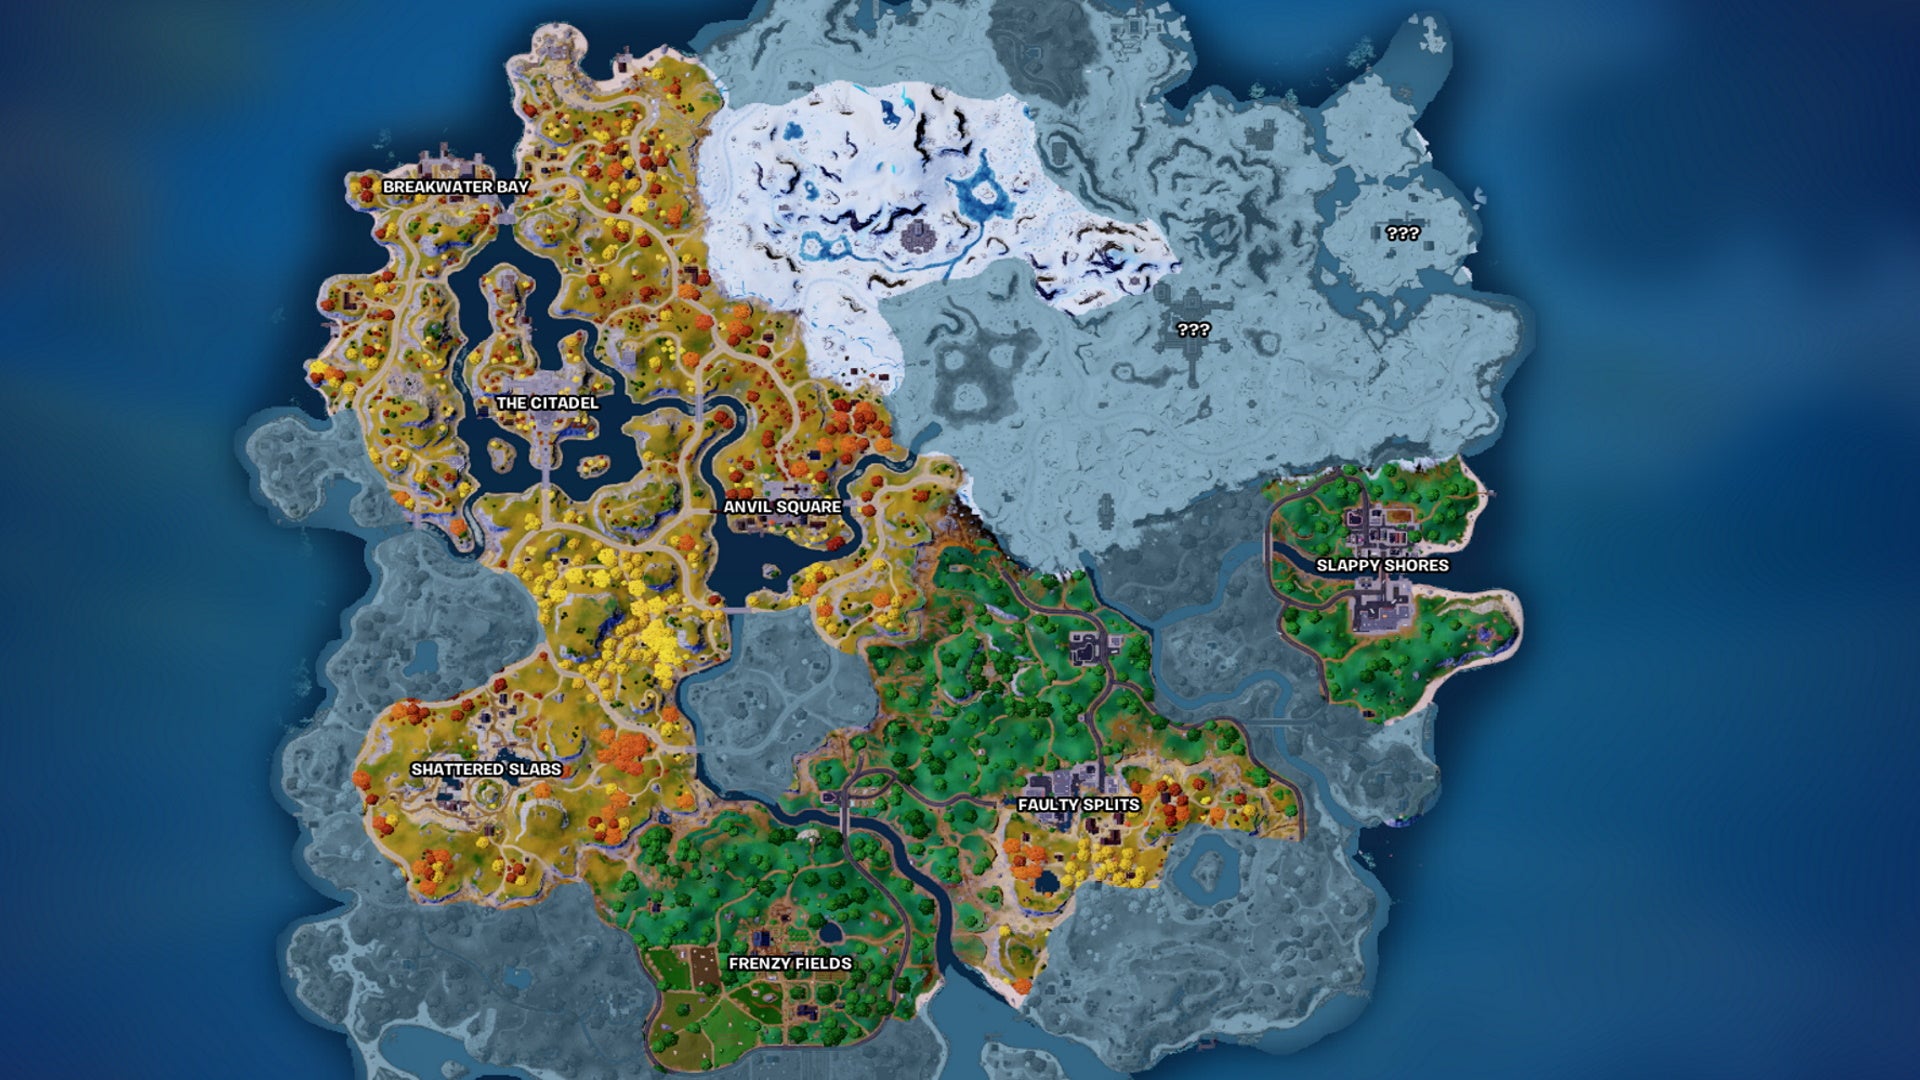 Fortnite dirt bike locations: A map showing the Fortnite chapter 4 map, including snowy regions where you can find dirt bikes